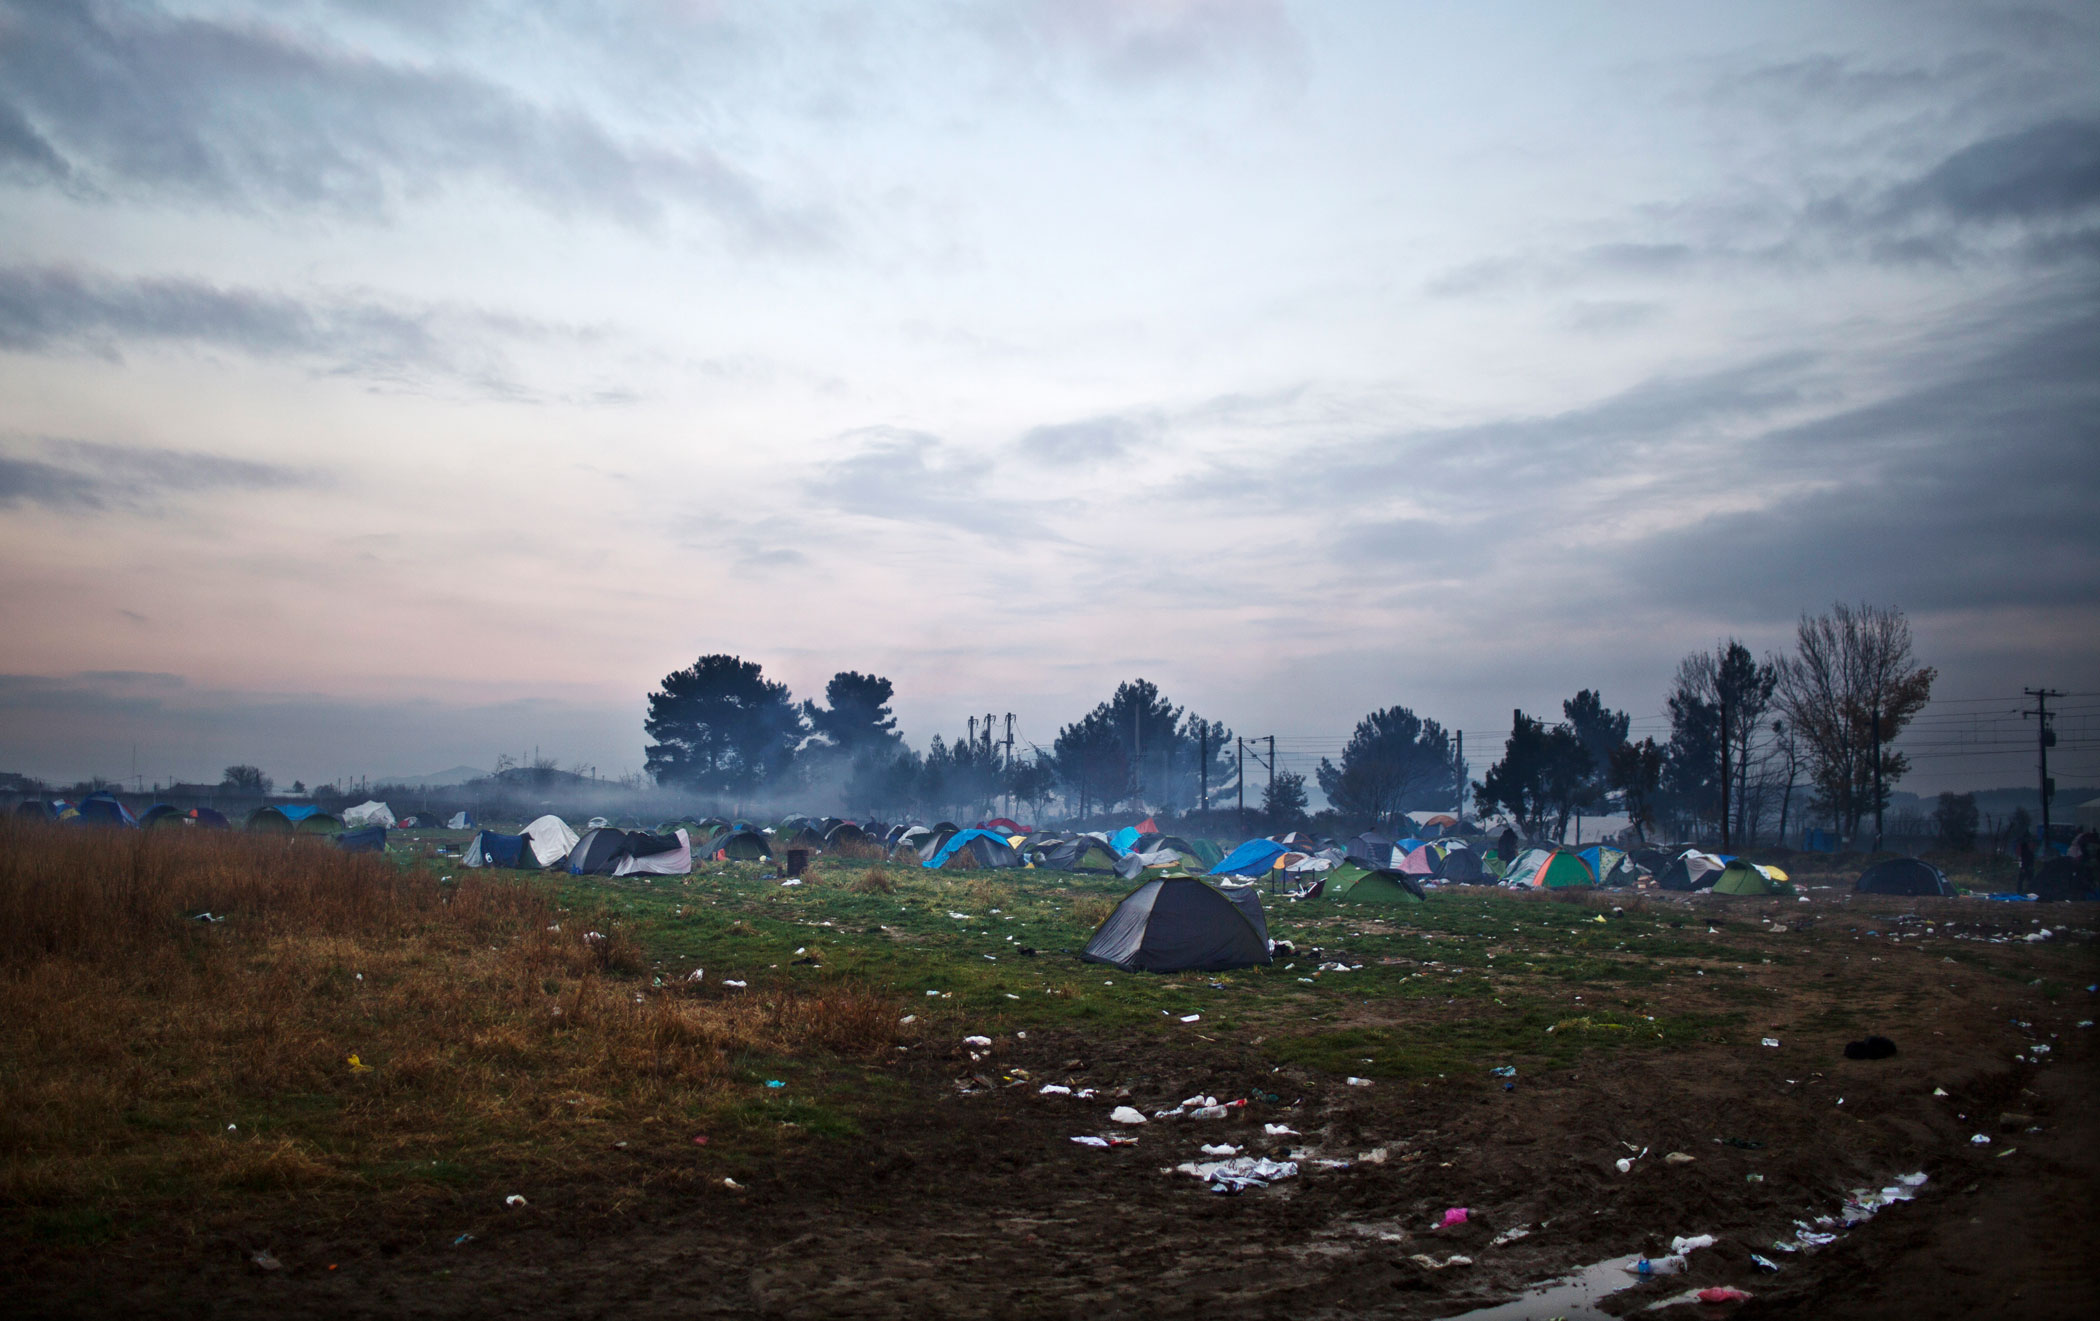 Tents at the Greek-Macedonian border, filled with migrants like the Qasus who are waiting to cross into Macedonia, near the northern Greek village of Idomeni, Dec. 5, 2015.